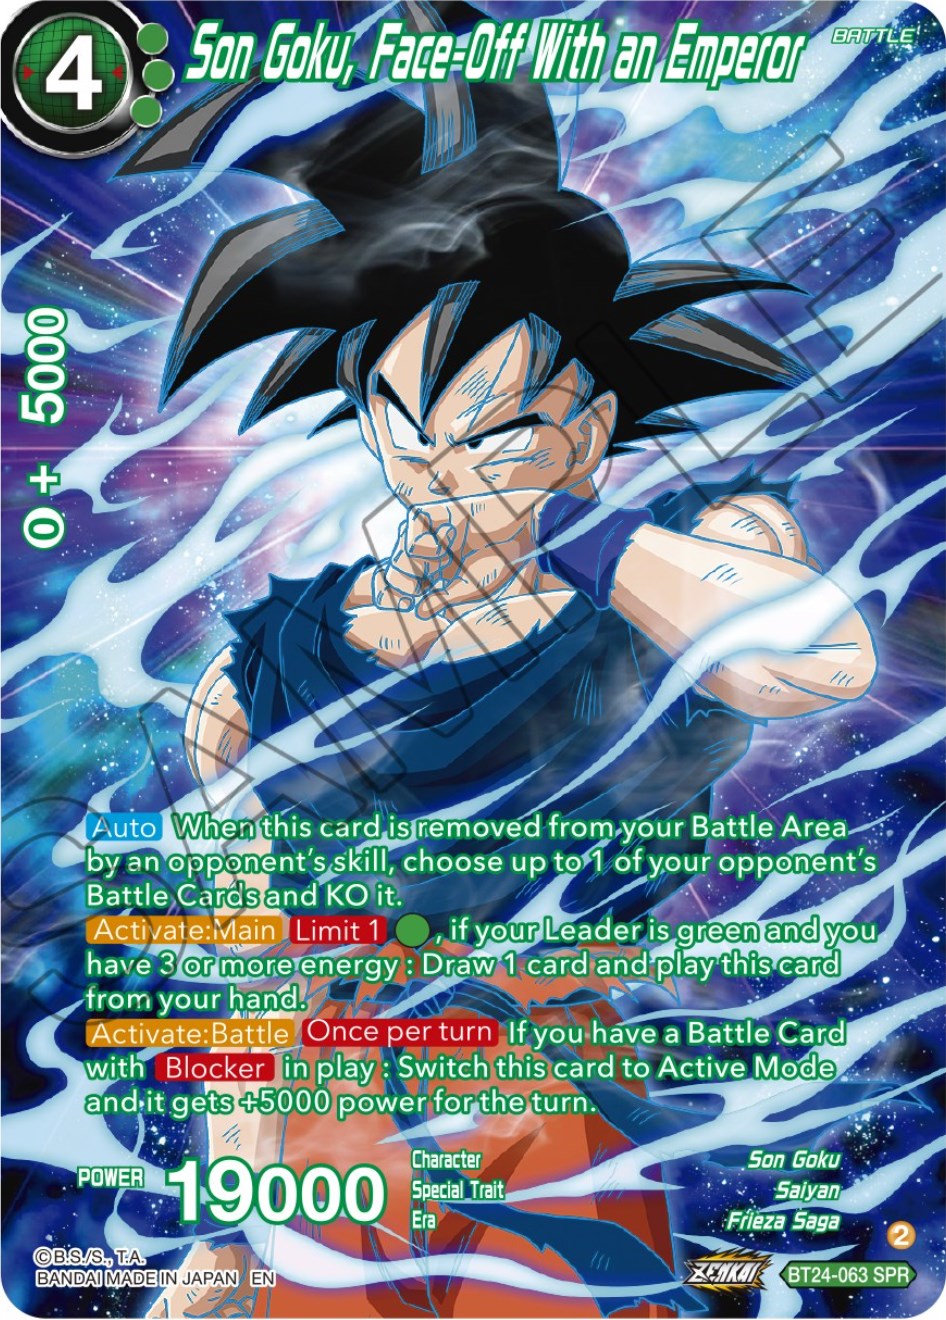 Son Goku, Face-Off With an Emperor (SPR) (BT24-063) [Beyond Generations] | Sanctuary Gaming